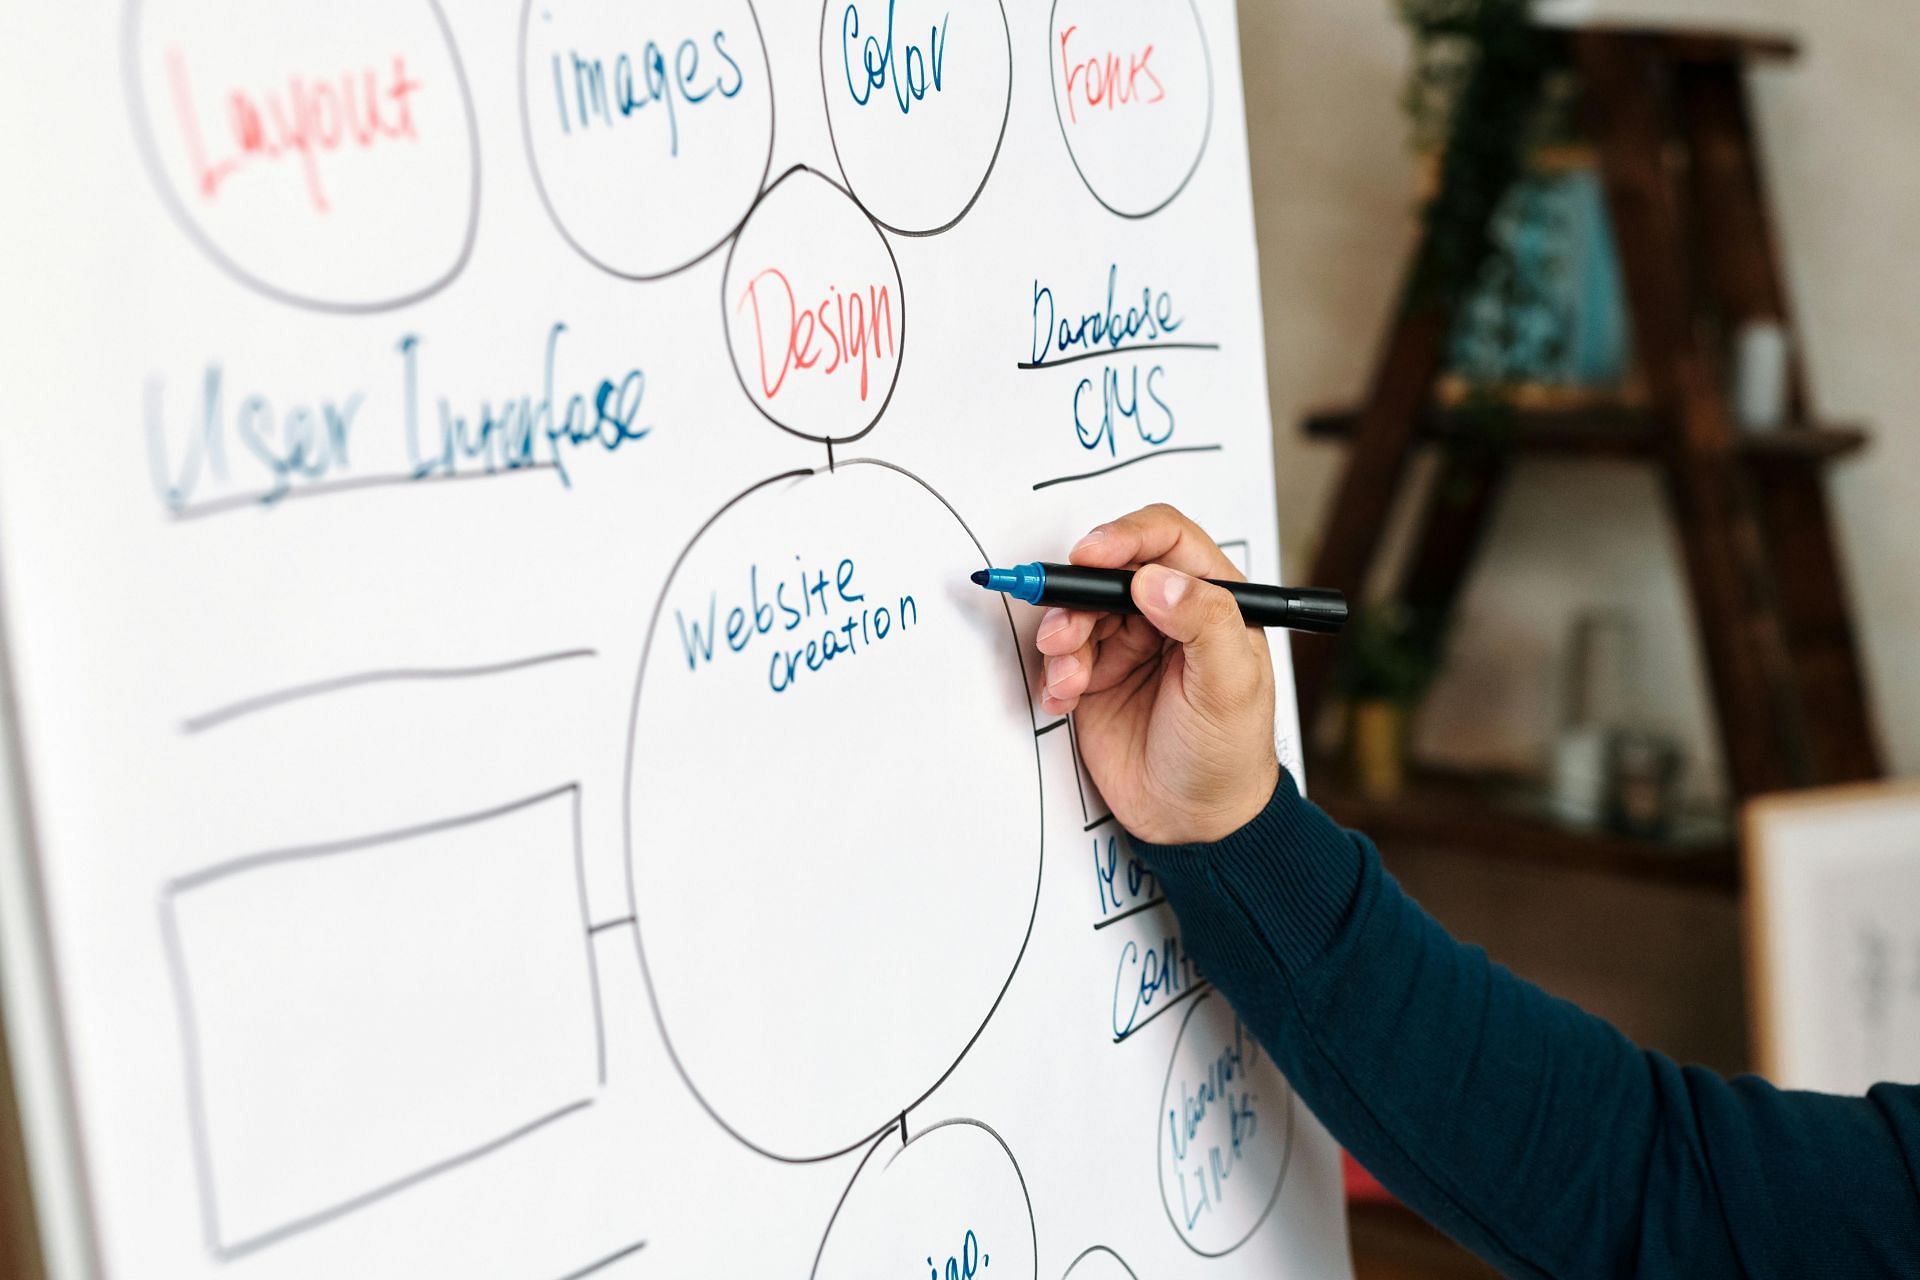 Importance of making mind maps (image sourced via Pexels / Photo by Diva)